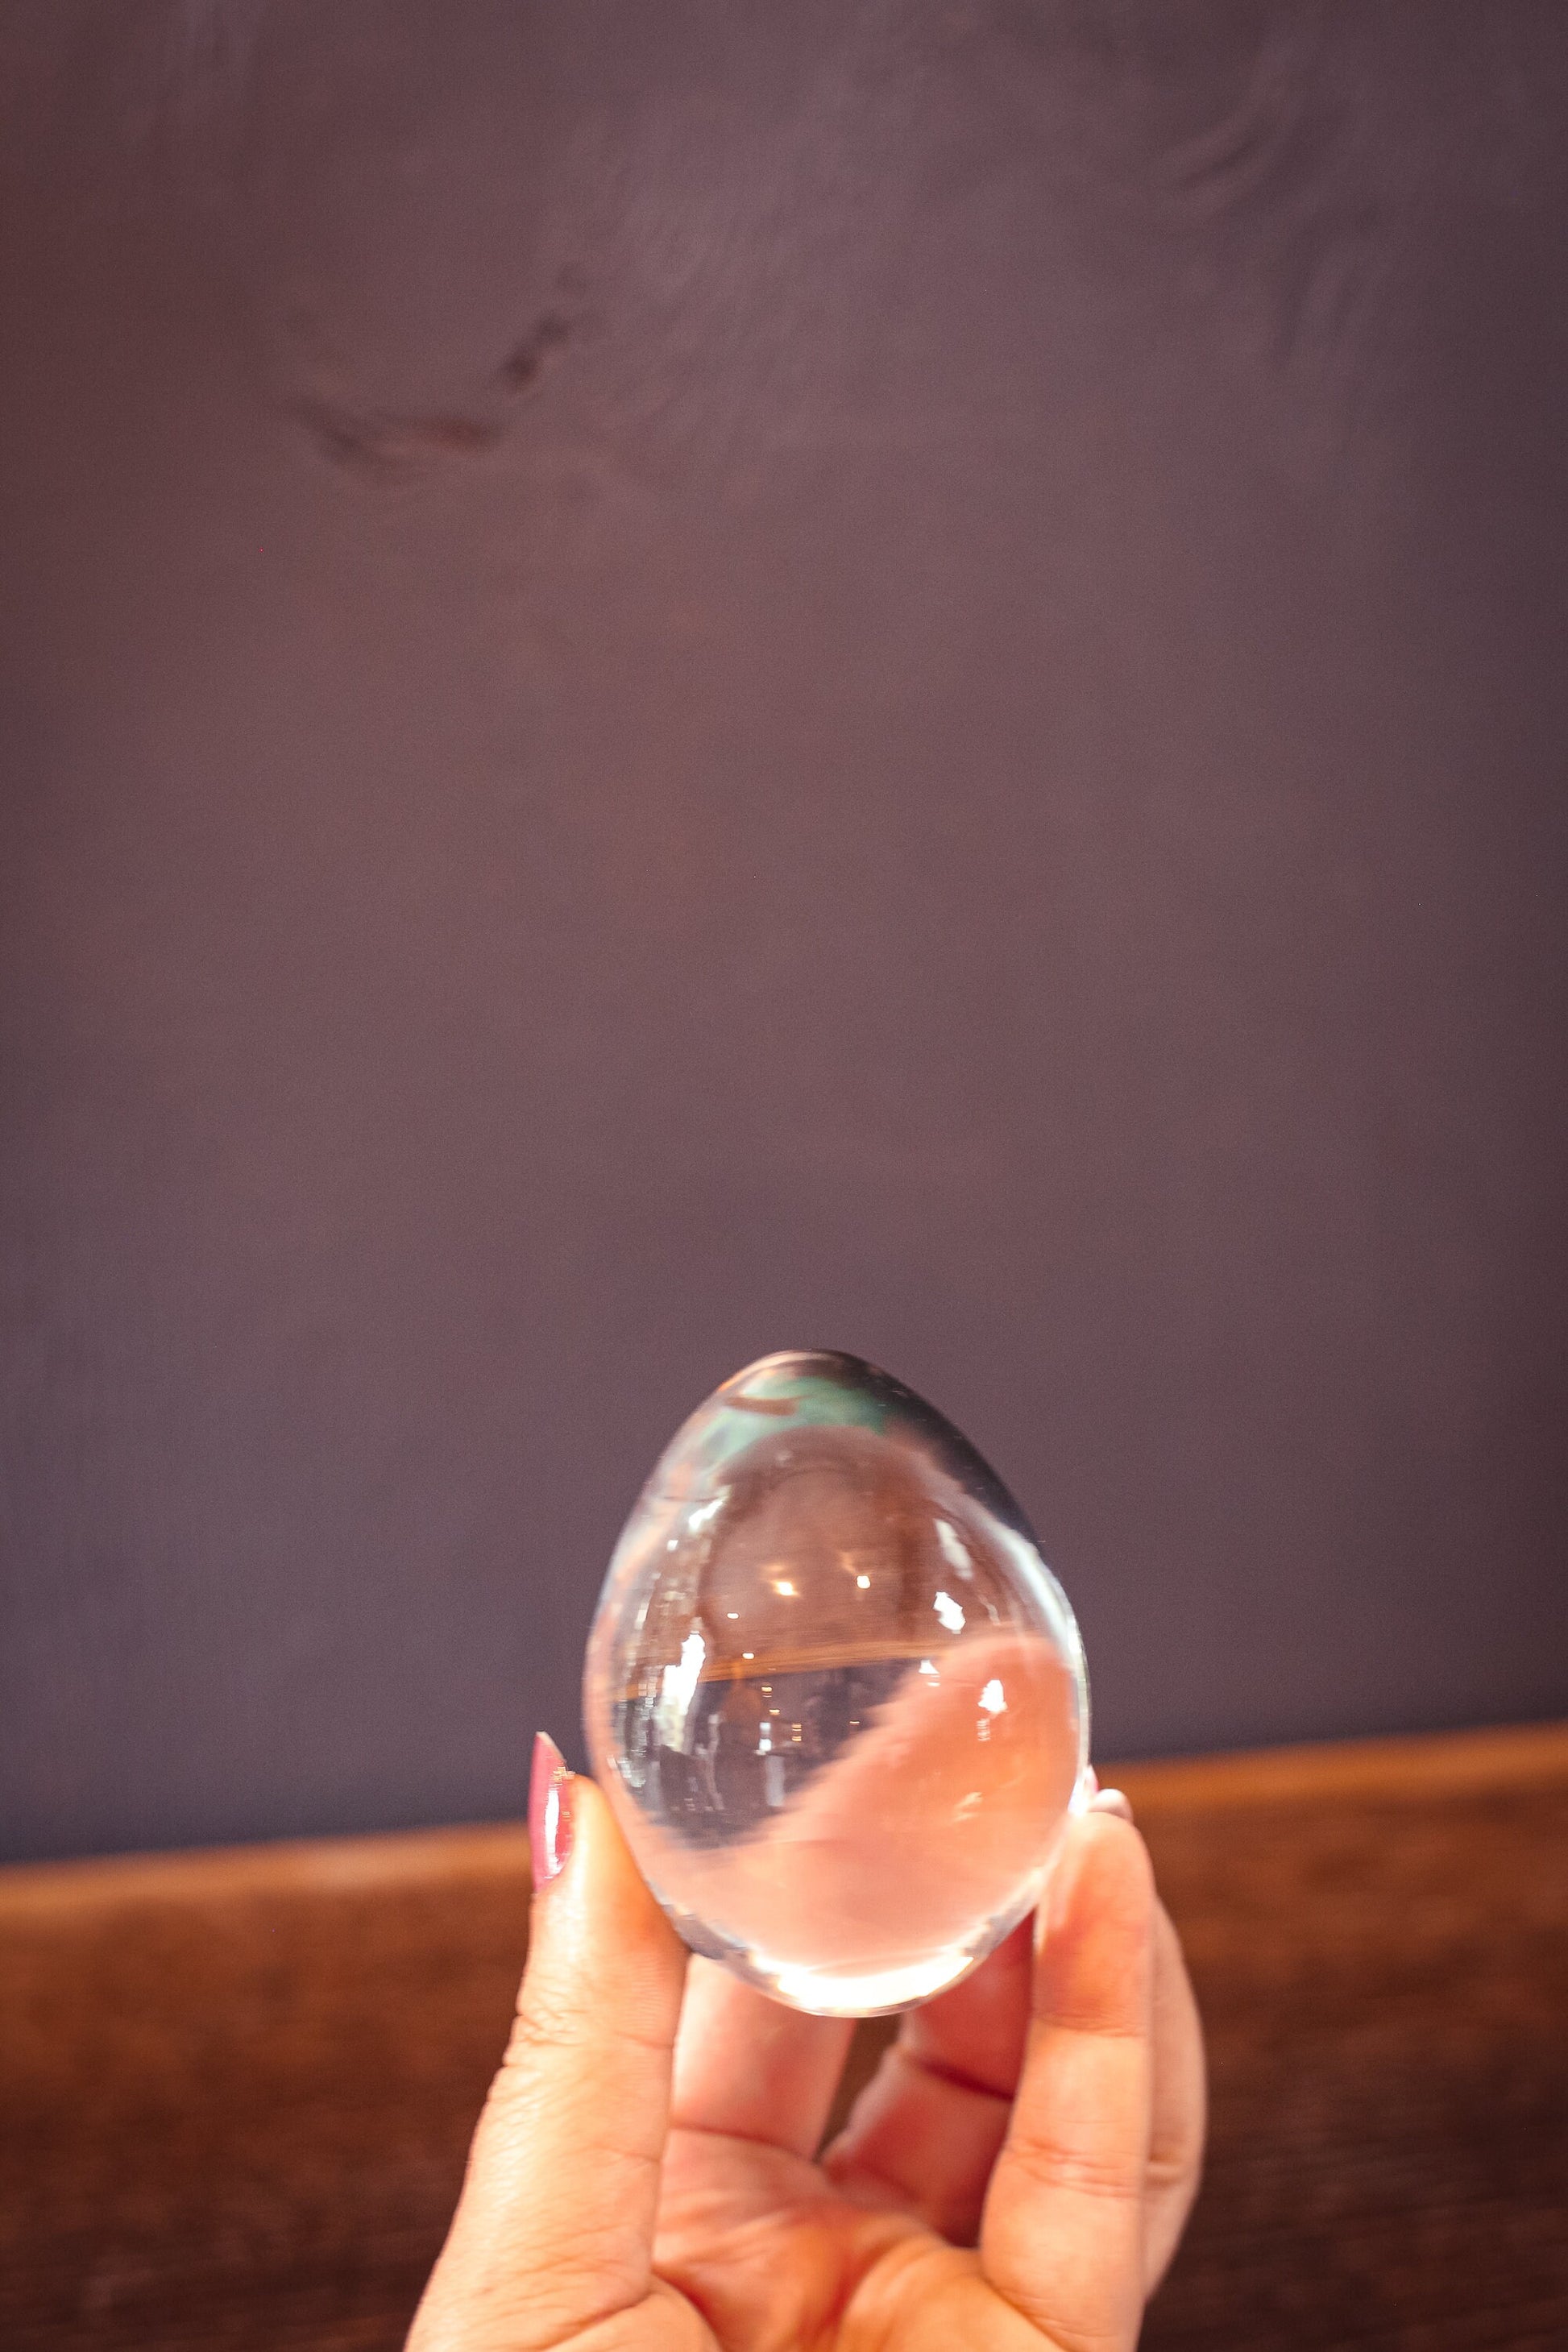 Art Glass Egg with Ombre Gradient Illusion - Vintage Glass Art Object Clear to Translucent Grey Ombre Egg